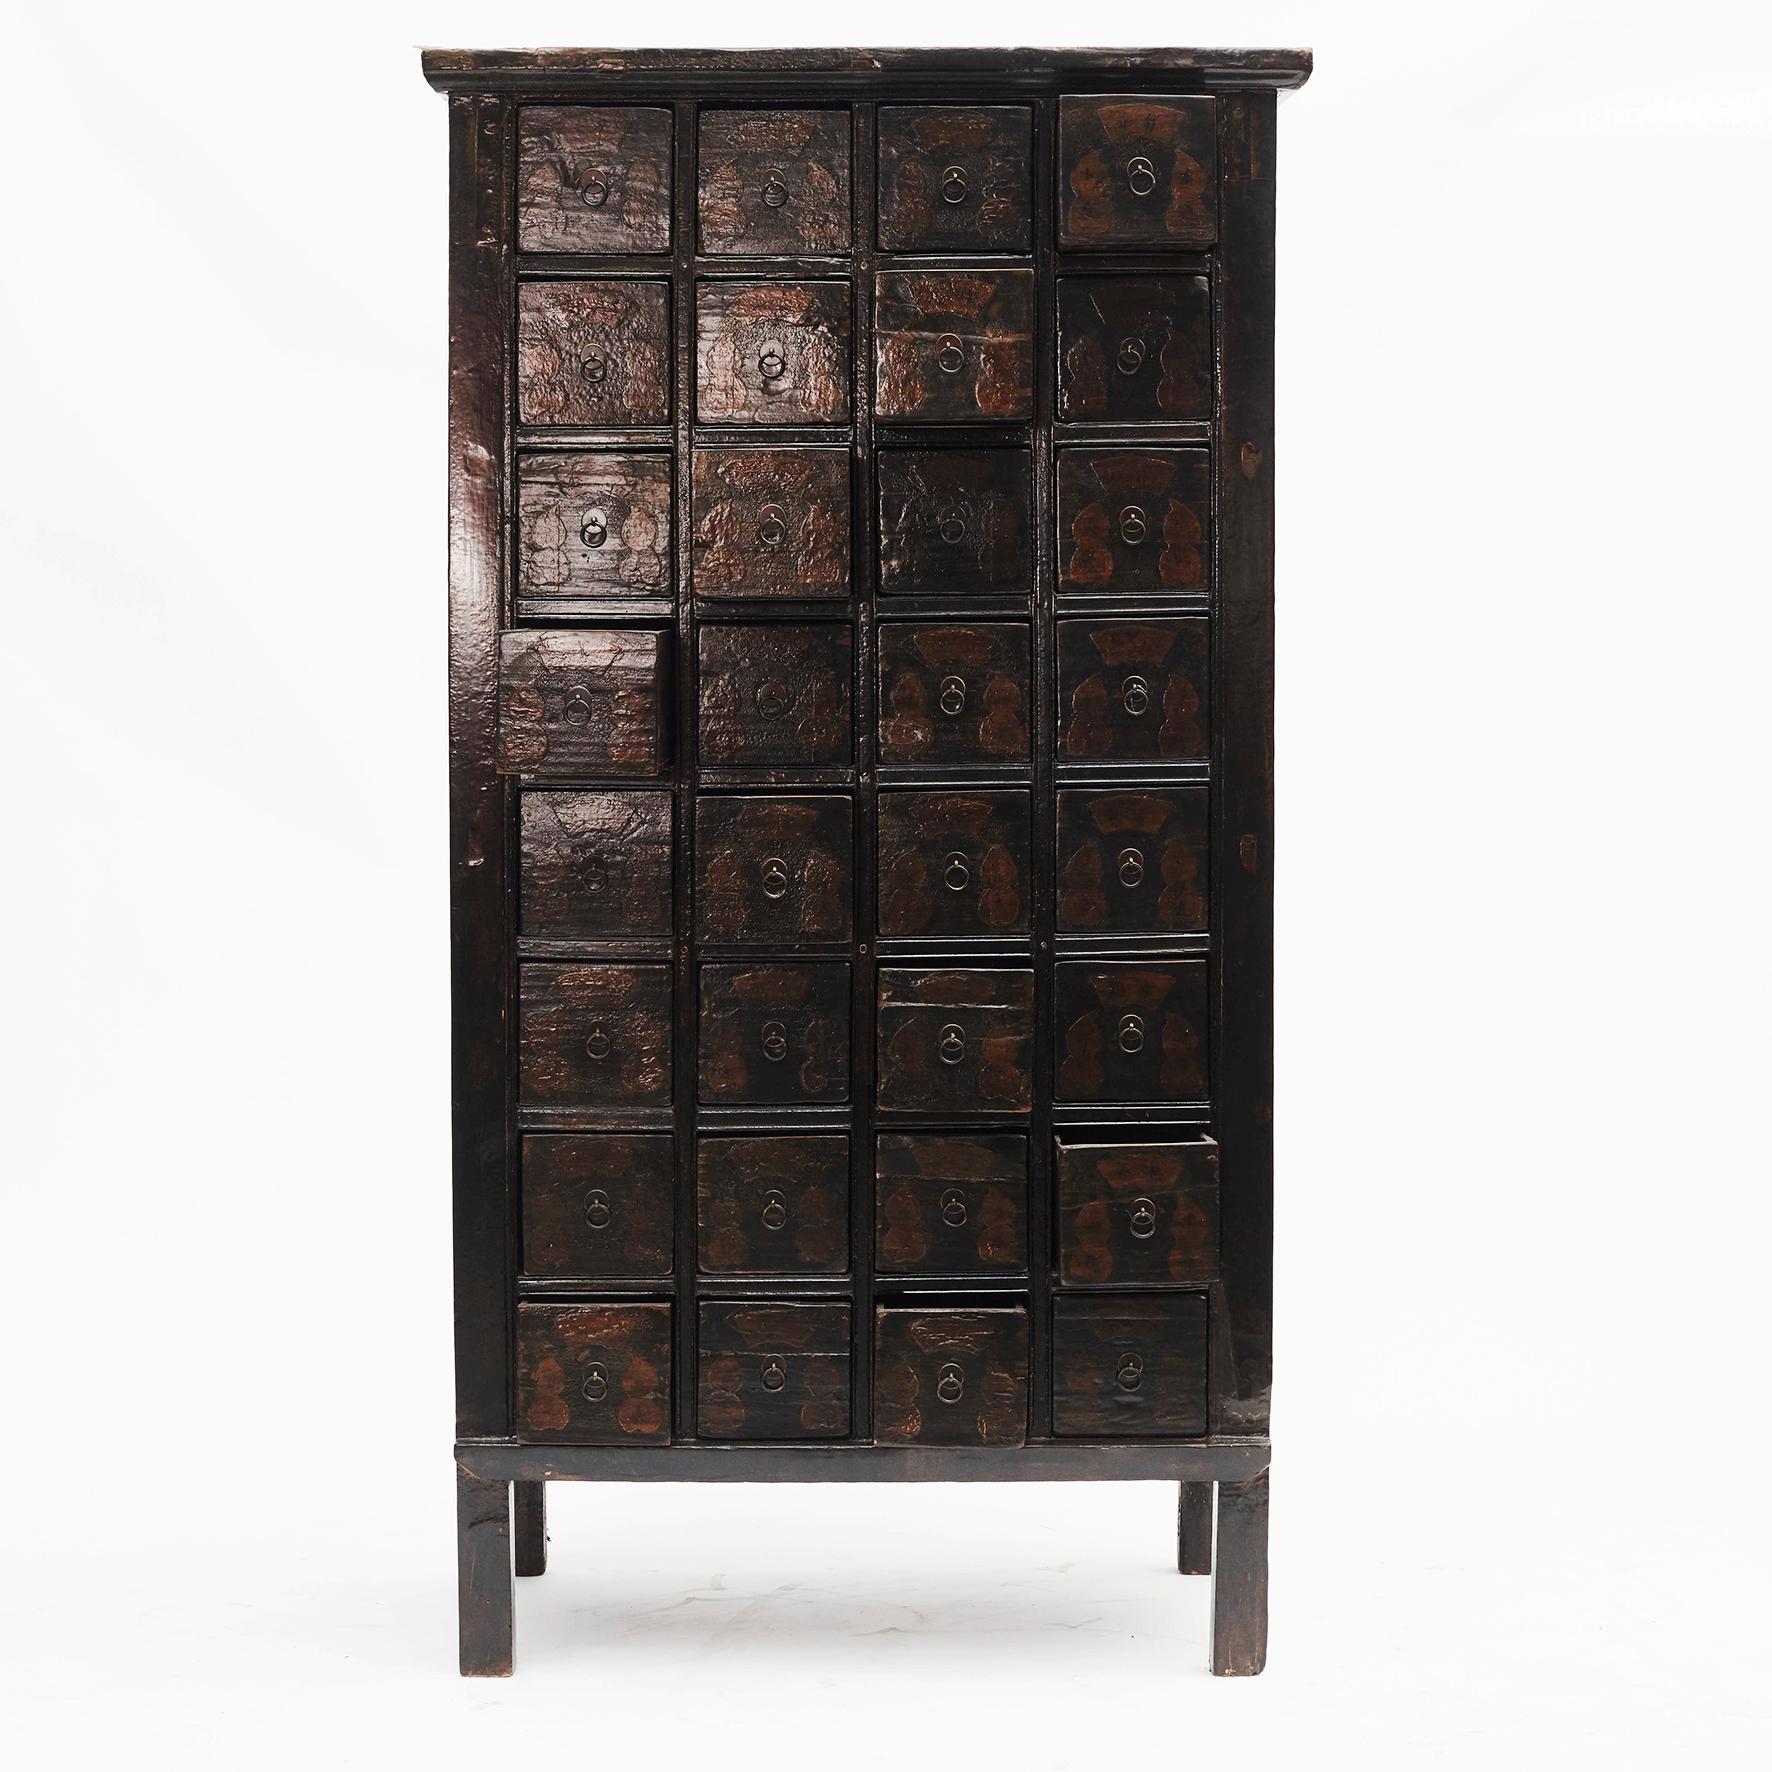 Beautiful Chinese apothecary medicine cabinet dating to circa 1840 from the Shanxi province, China. 
32 drawers with remains of the descriptions with the name of different medicinal herbs.
Original black lacquer. Signs of wear and tear that come